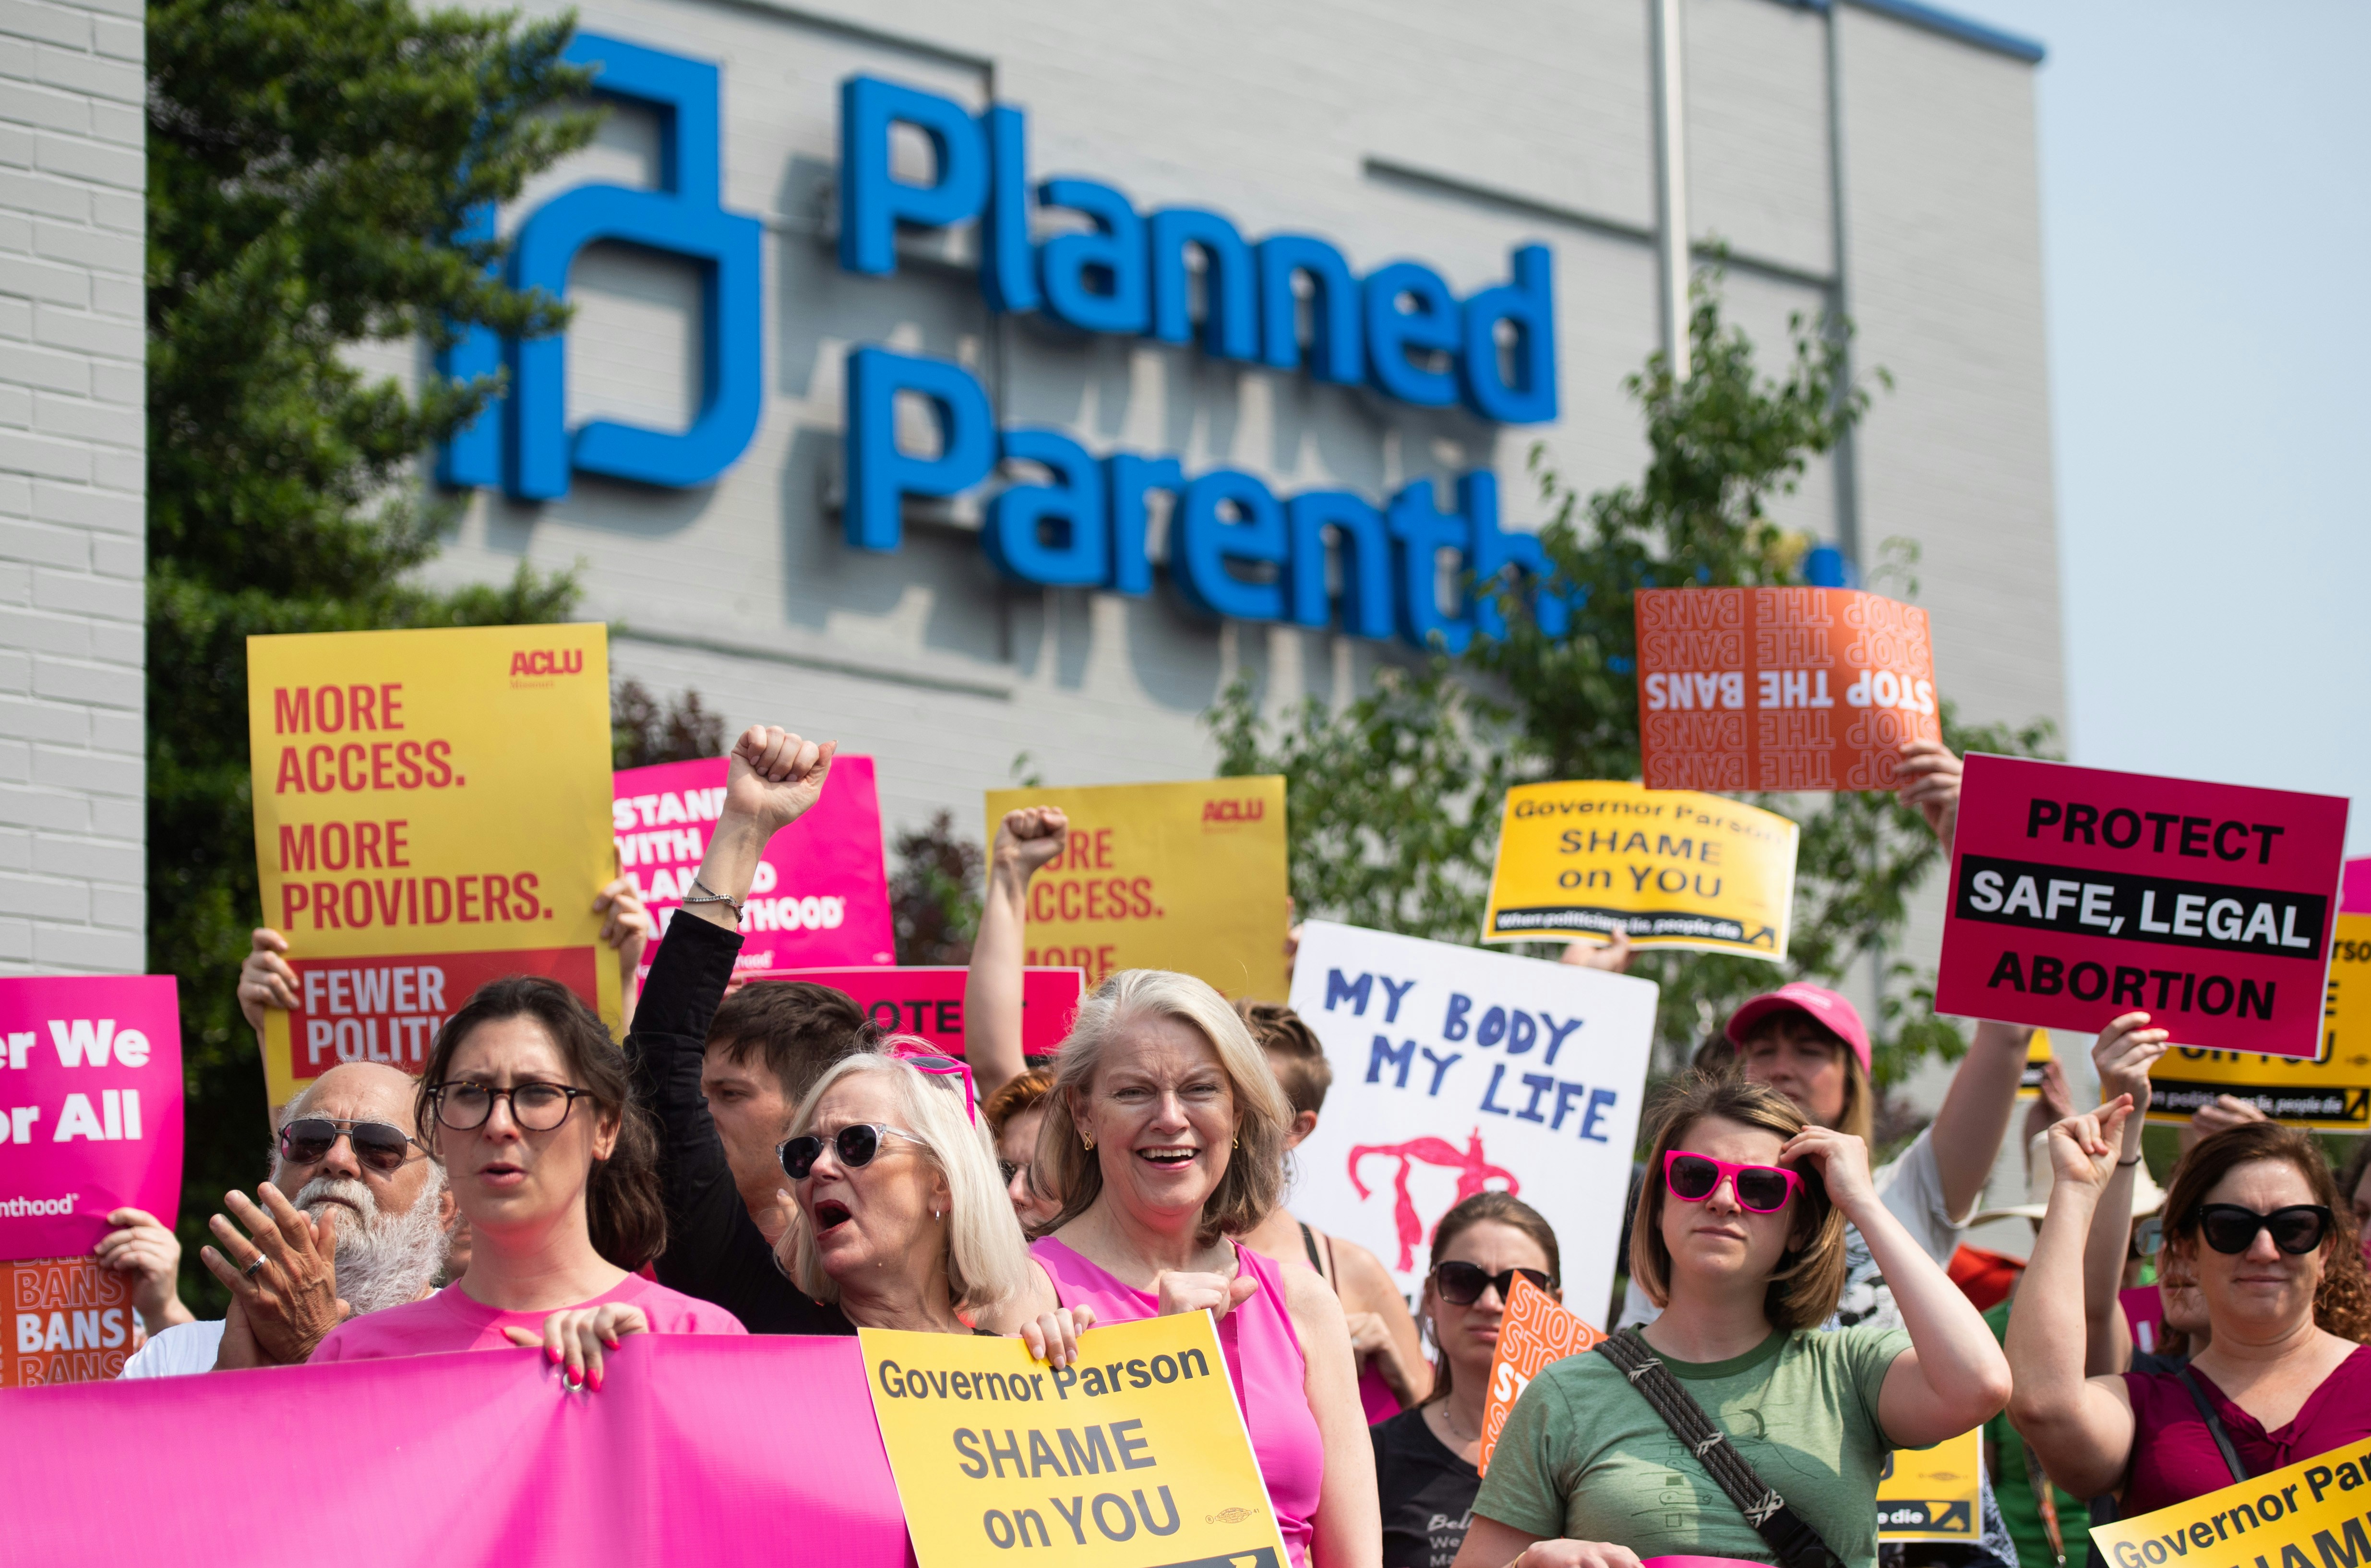 Pro-choice supporters and staff of Planned Parenthood hold a rally outside the Planned Parenthood Reproductive Health Services Center in St. Louis, Missouri, May 31, 2019, the last location in the state performing abortions. - A US Court on May 31, 2019 blocked Missouri from closing the clinic. (Photo by SAUL LOEB / AFP)        (Photo credit should read SAUL LOEB/AFP via Getty Images)